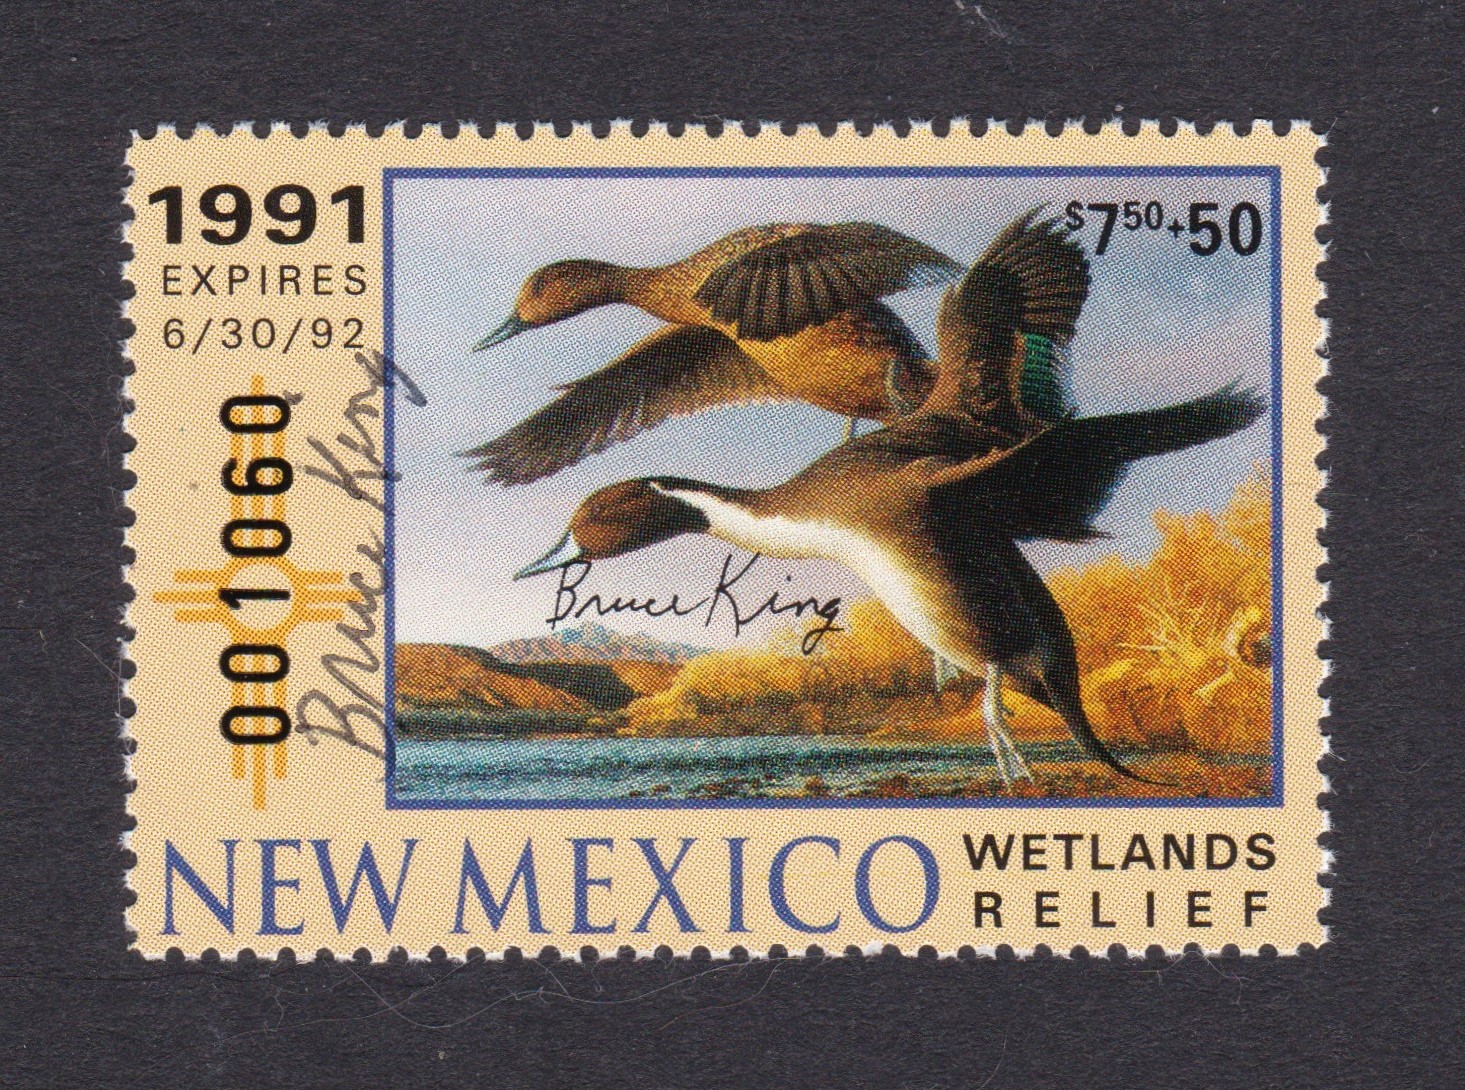 NM waterfowl W1GS $7.50+$$50 NH VF, 1991 Governor's Edition, hand signed by Bruce King (deceased) P